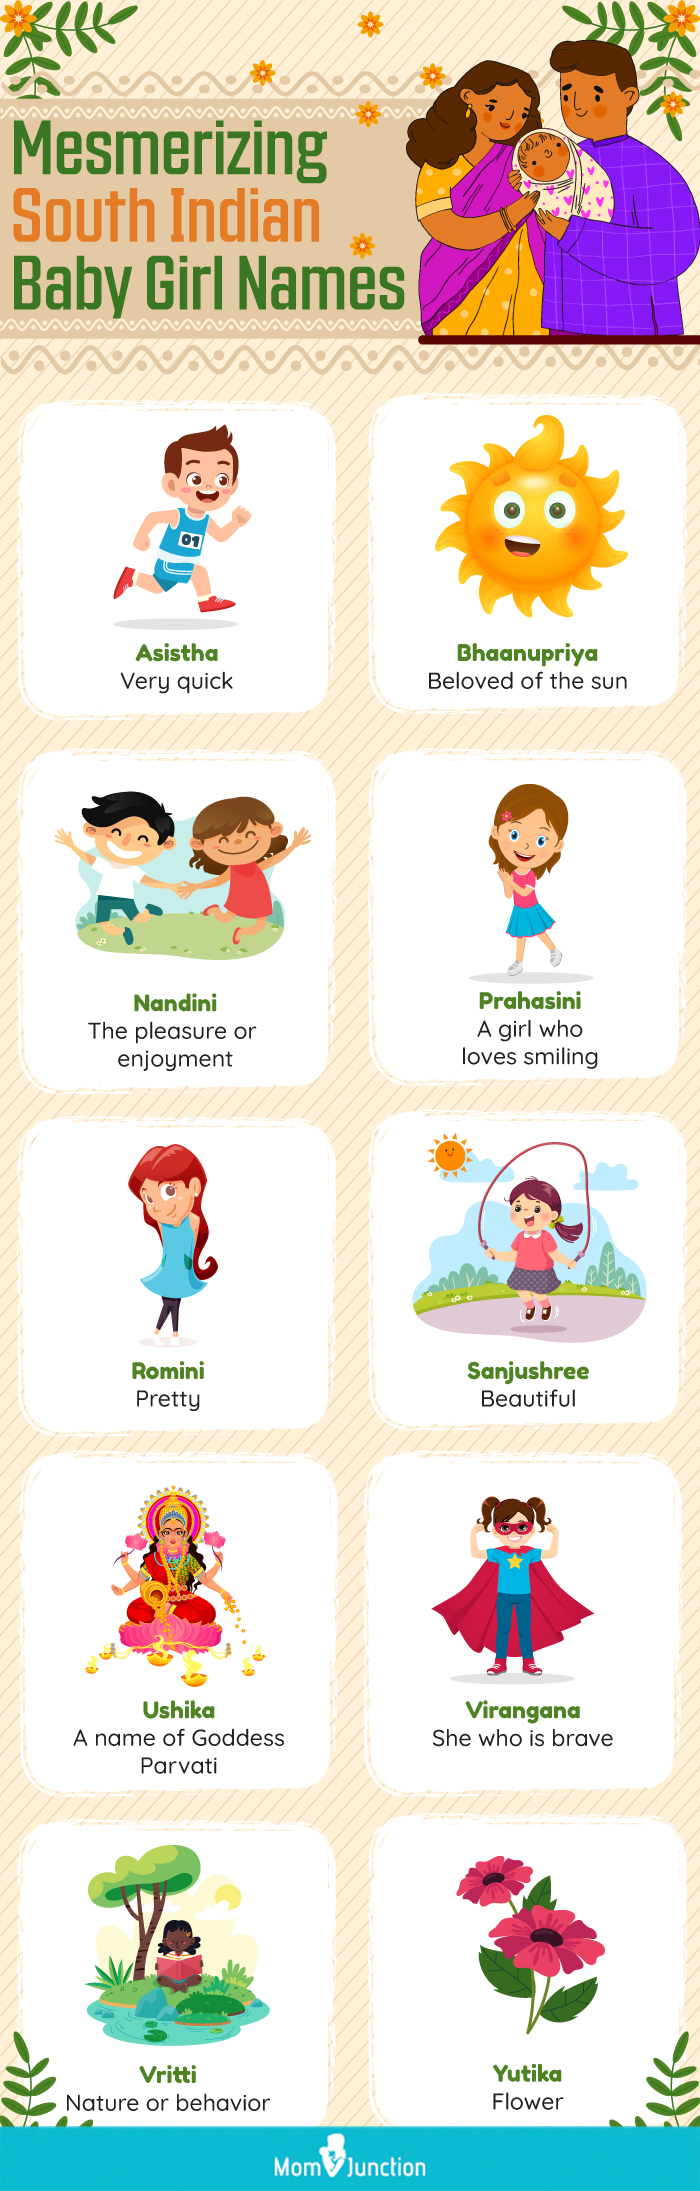 mesmerizing south indian baby girl names (infographic)